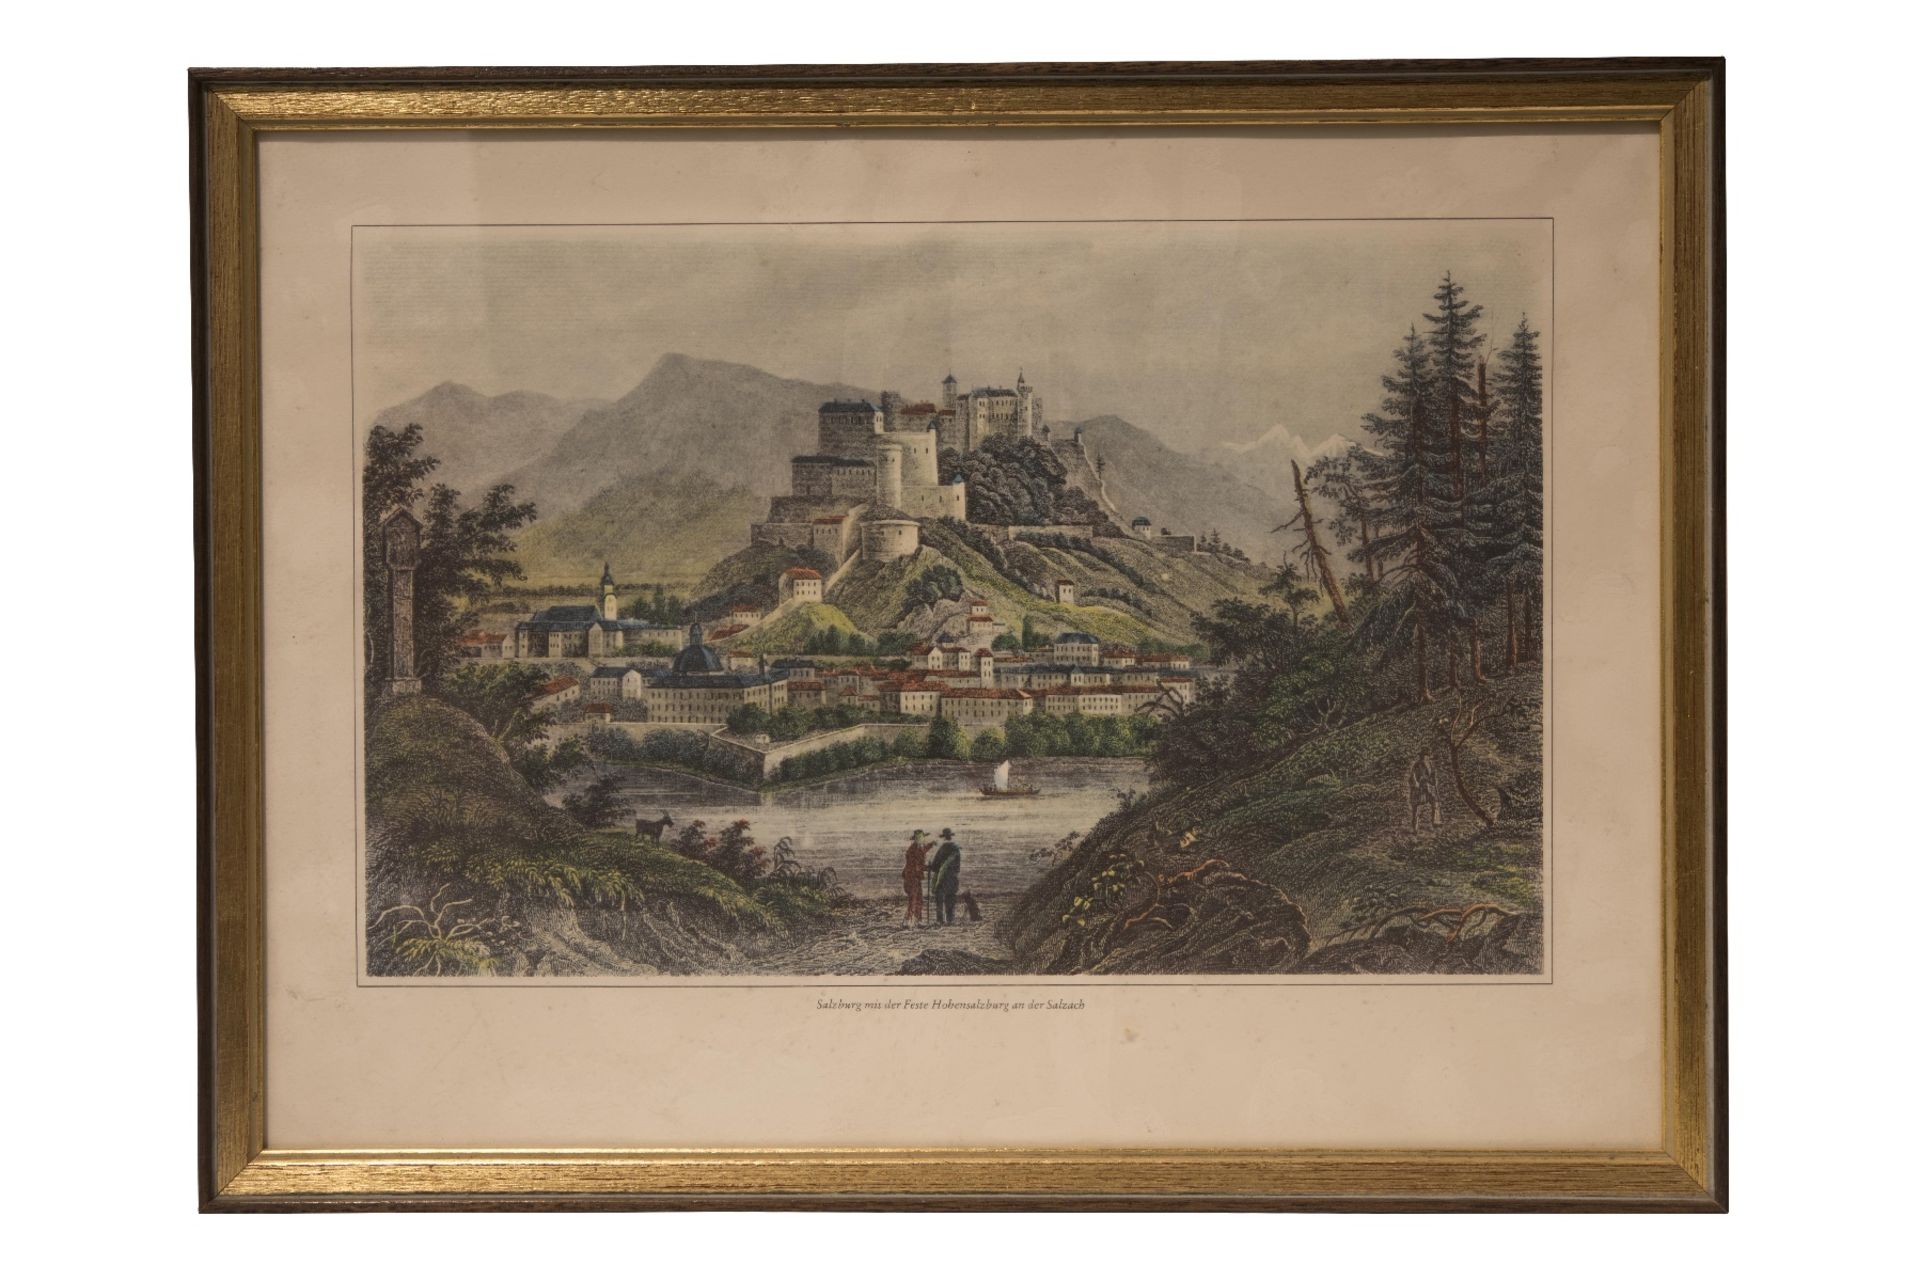 Artists of the 19th Century, Salzburg with Fortress Hohensalzburg on the Salzach River